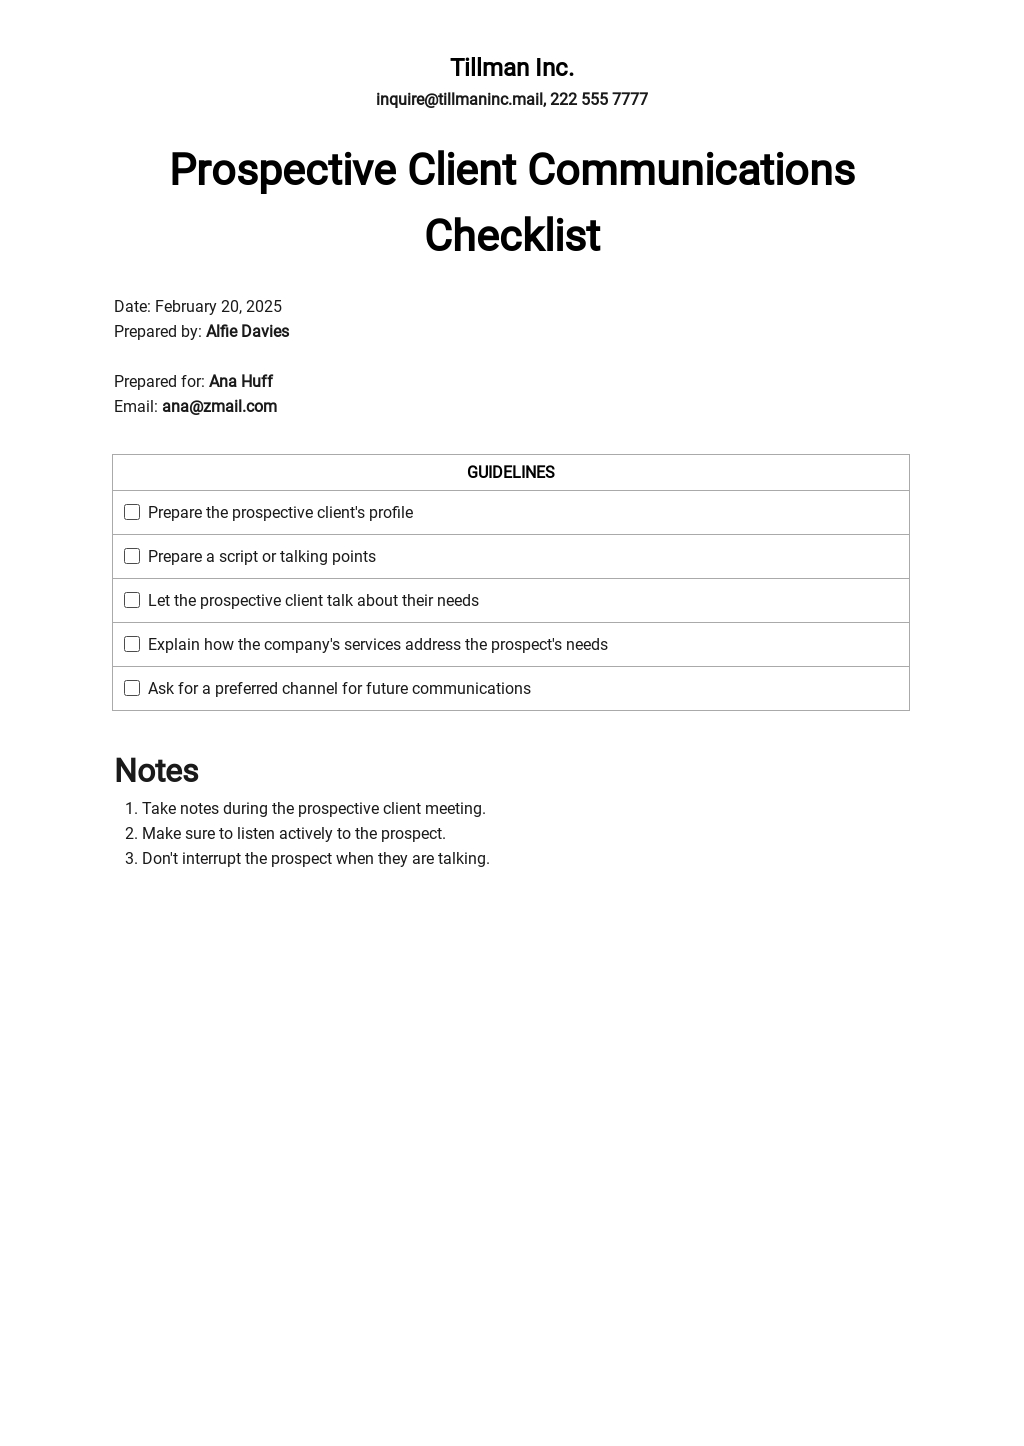 Checklist Communicating with Prospective Clients Template.jpe